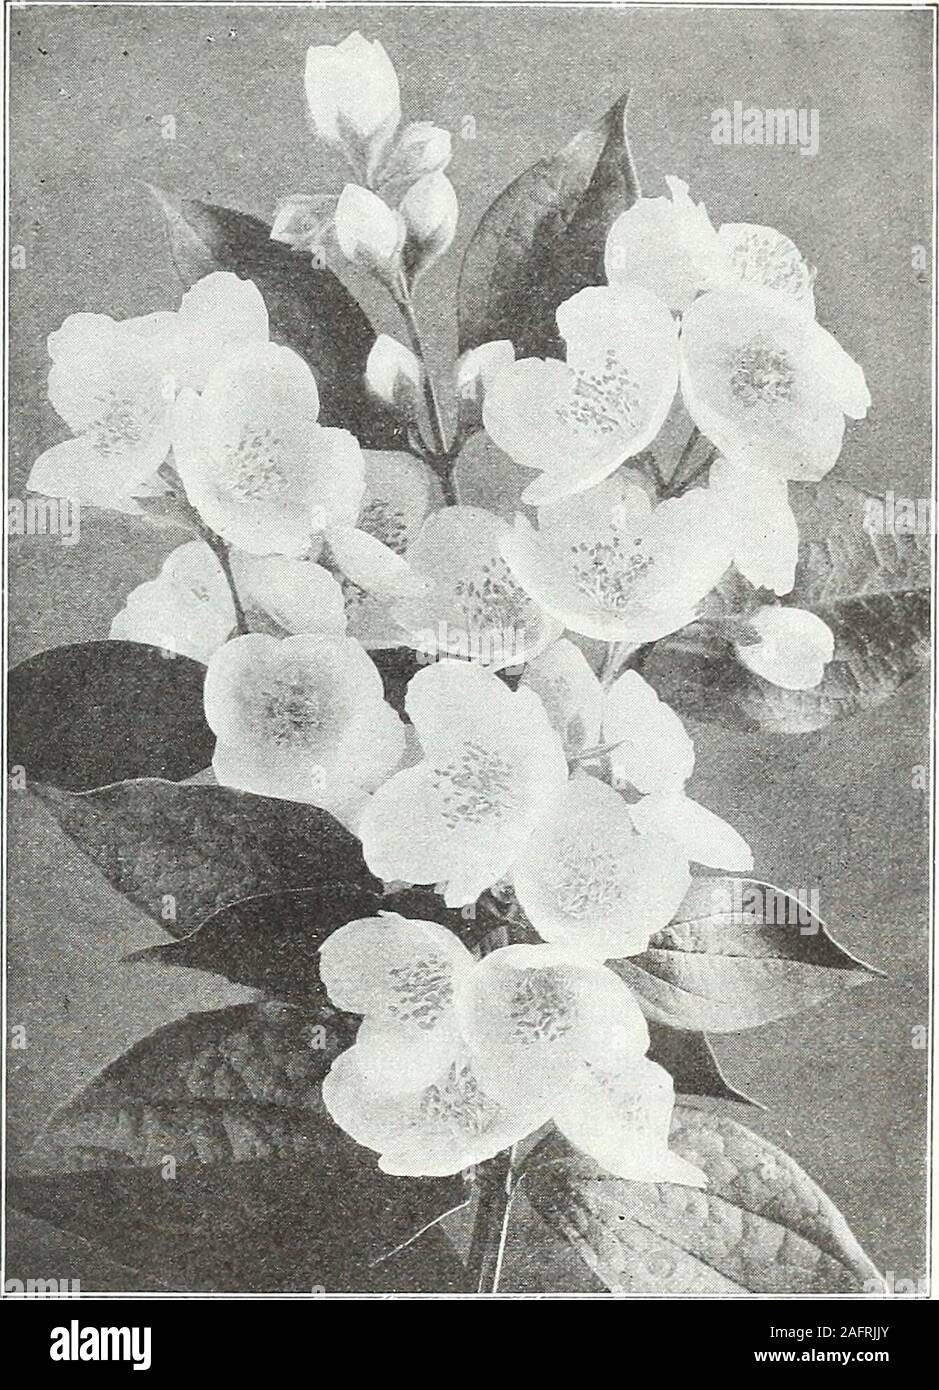 . Farquhar's autumn catalogue : 1921. Lonicera Tatarica. Tatarian Honeysuckle. Philadelphus coronarius grandiflorus. Syring-a. RHUS cotinus. (PurpleFringe.) (SmokeBush.) A tall shrub, bearing Doz.masses of misty smoke-colored flowers in June. 60 cts. each . $6.00 typhina laeiniata. (Fem-hared Staghom Sumach.) An efiectiveshrub with delicate fern-like foliage; very brilliant in the Autumn.75 cts. each 7.50 SAMBUCUSaurea. (GoldenElder.) 60 cts. each 6.00 canadensis. (Common Elder.) Flat heads of white flowers in Jureand reddish-purple berries in Fall. Thrives best in damp soil60 cts. each 6,00 c Stock Photo